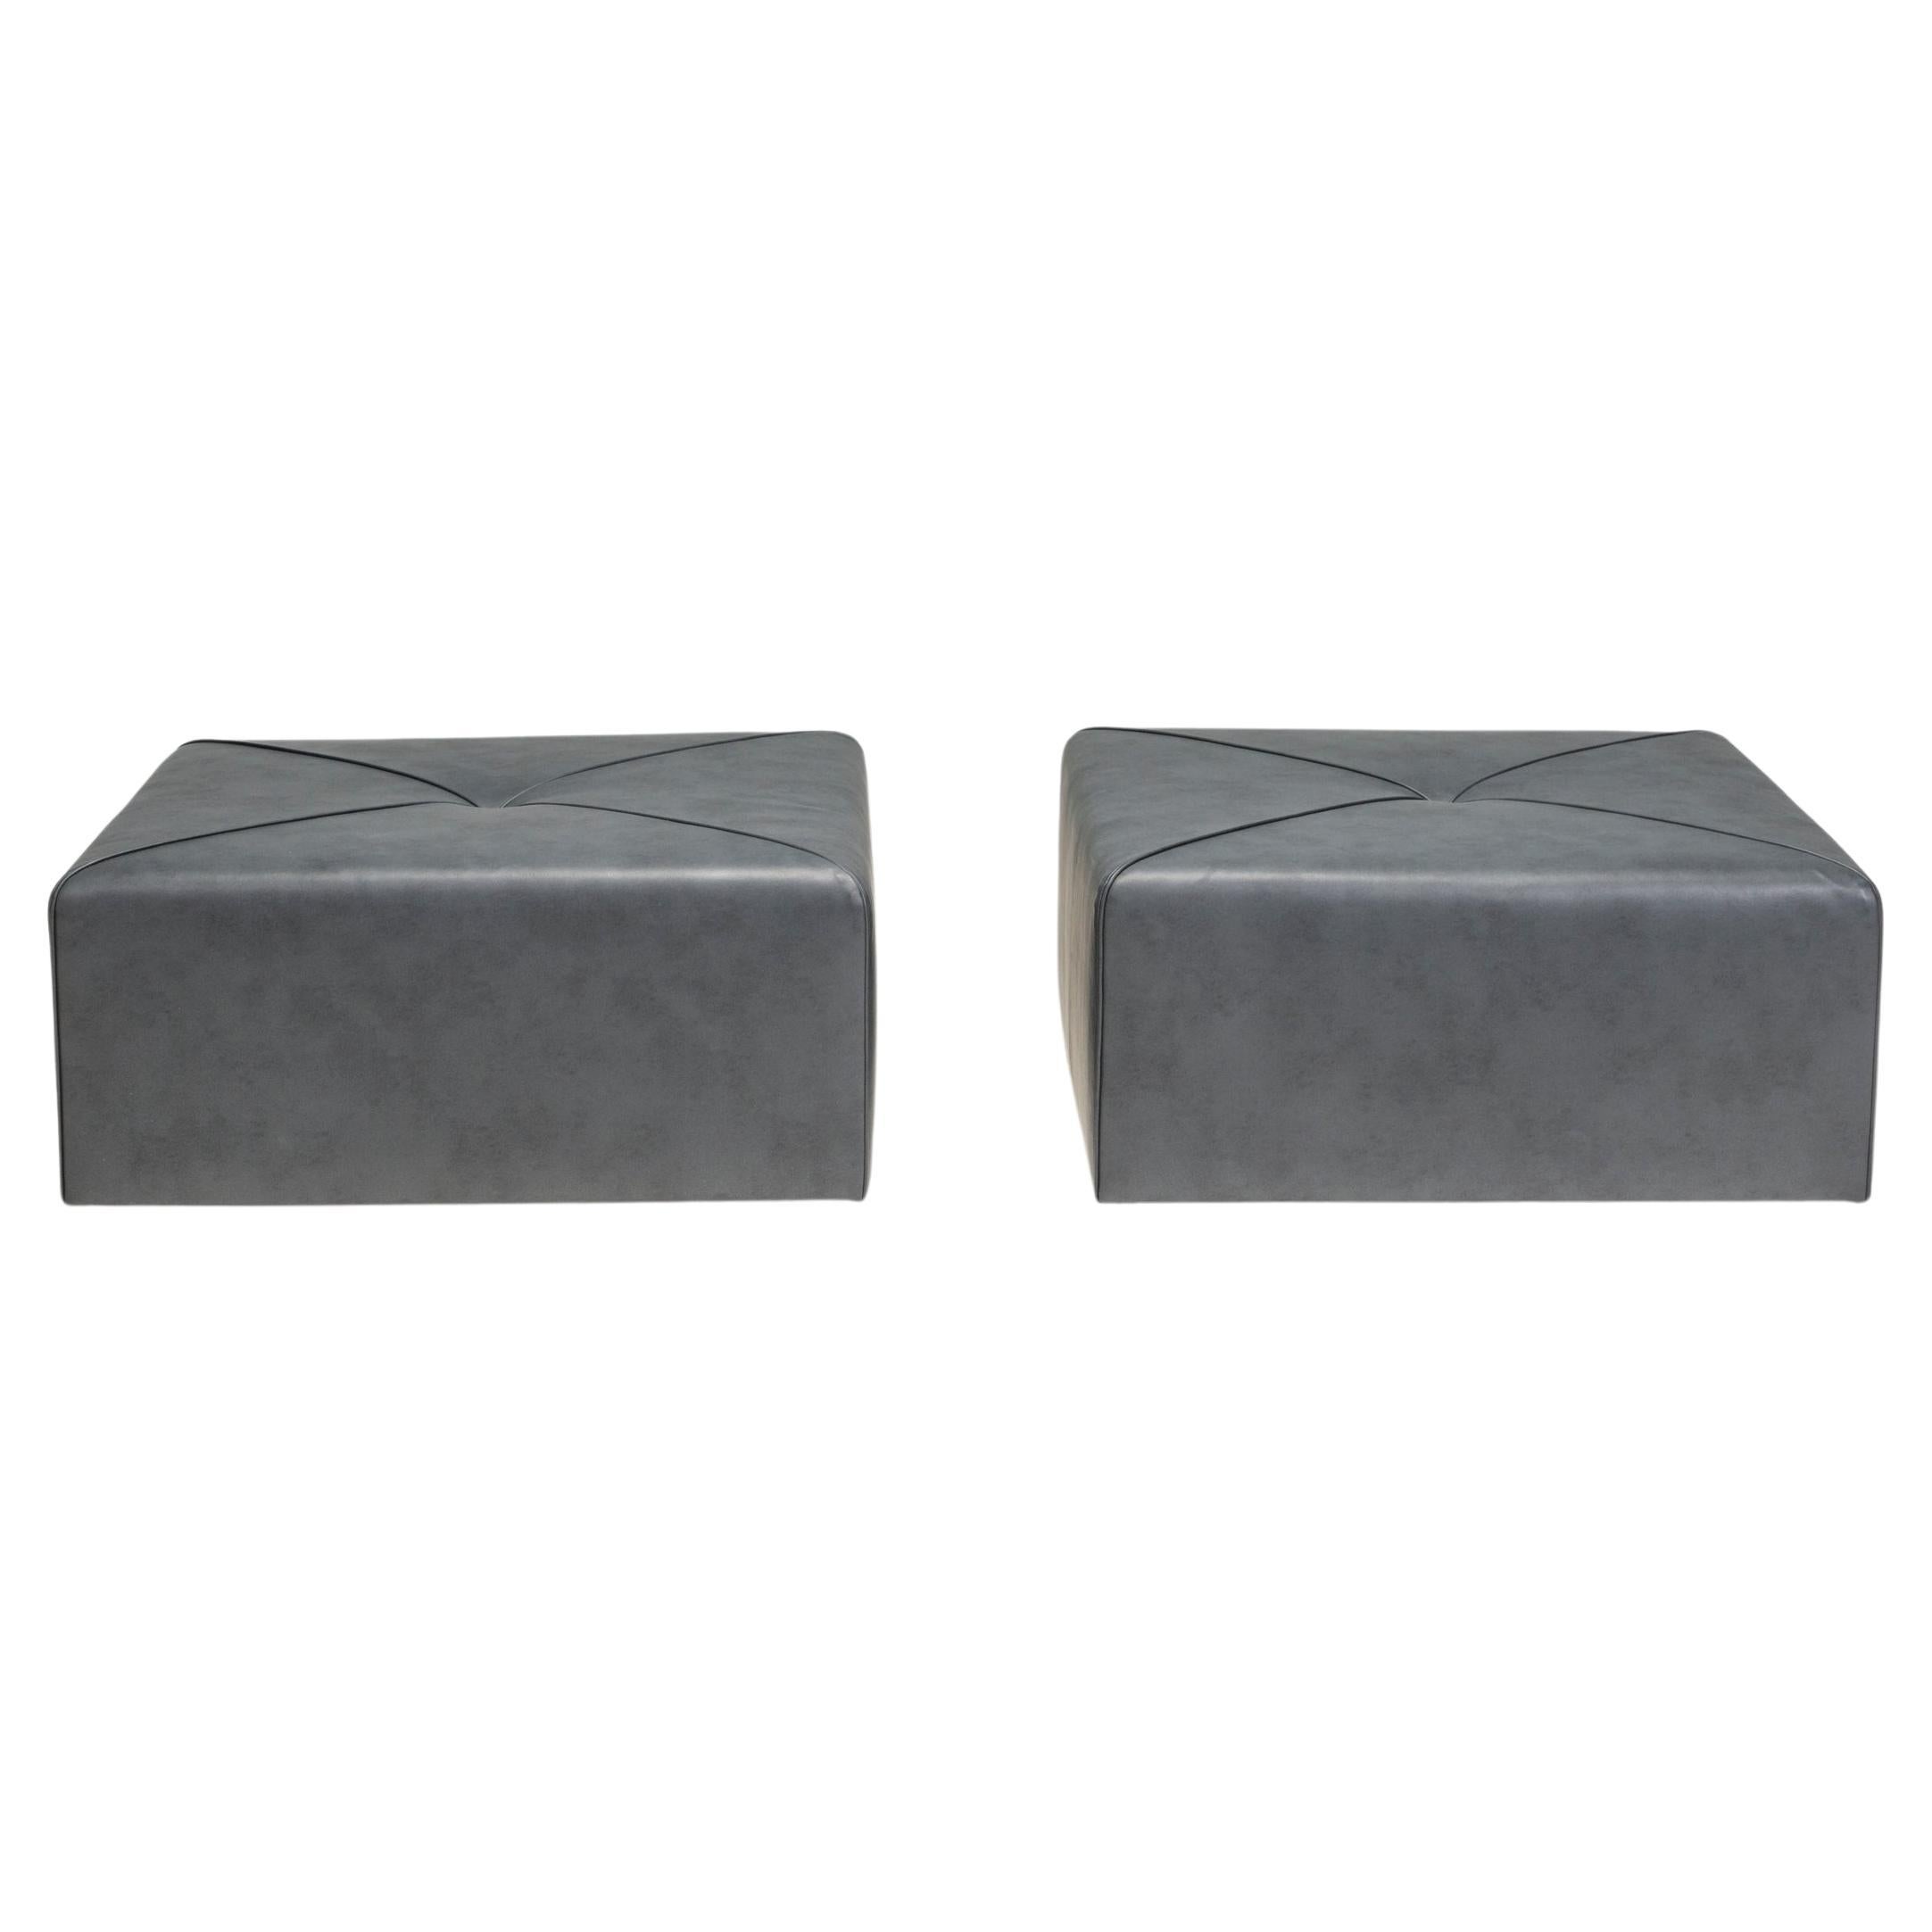 Bespoke Dark Grey Leather Square Ottomans, Set of 2 For Sale